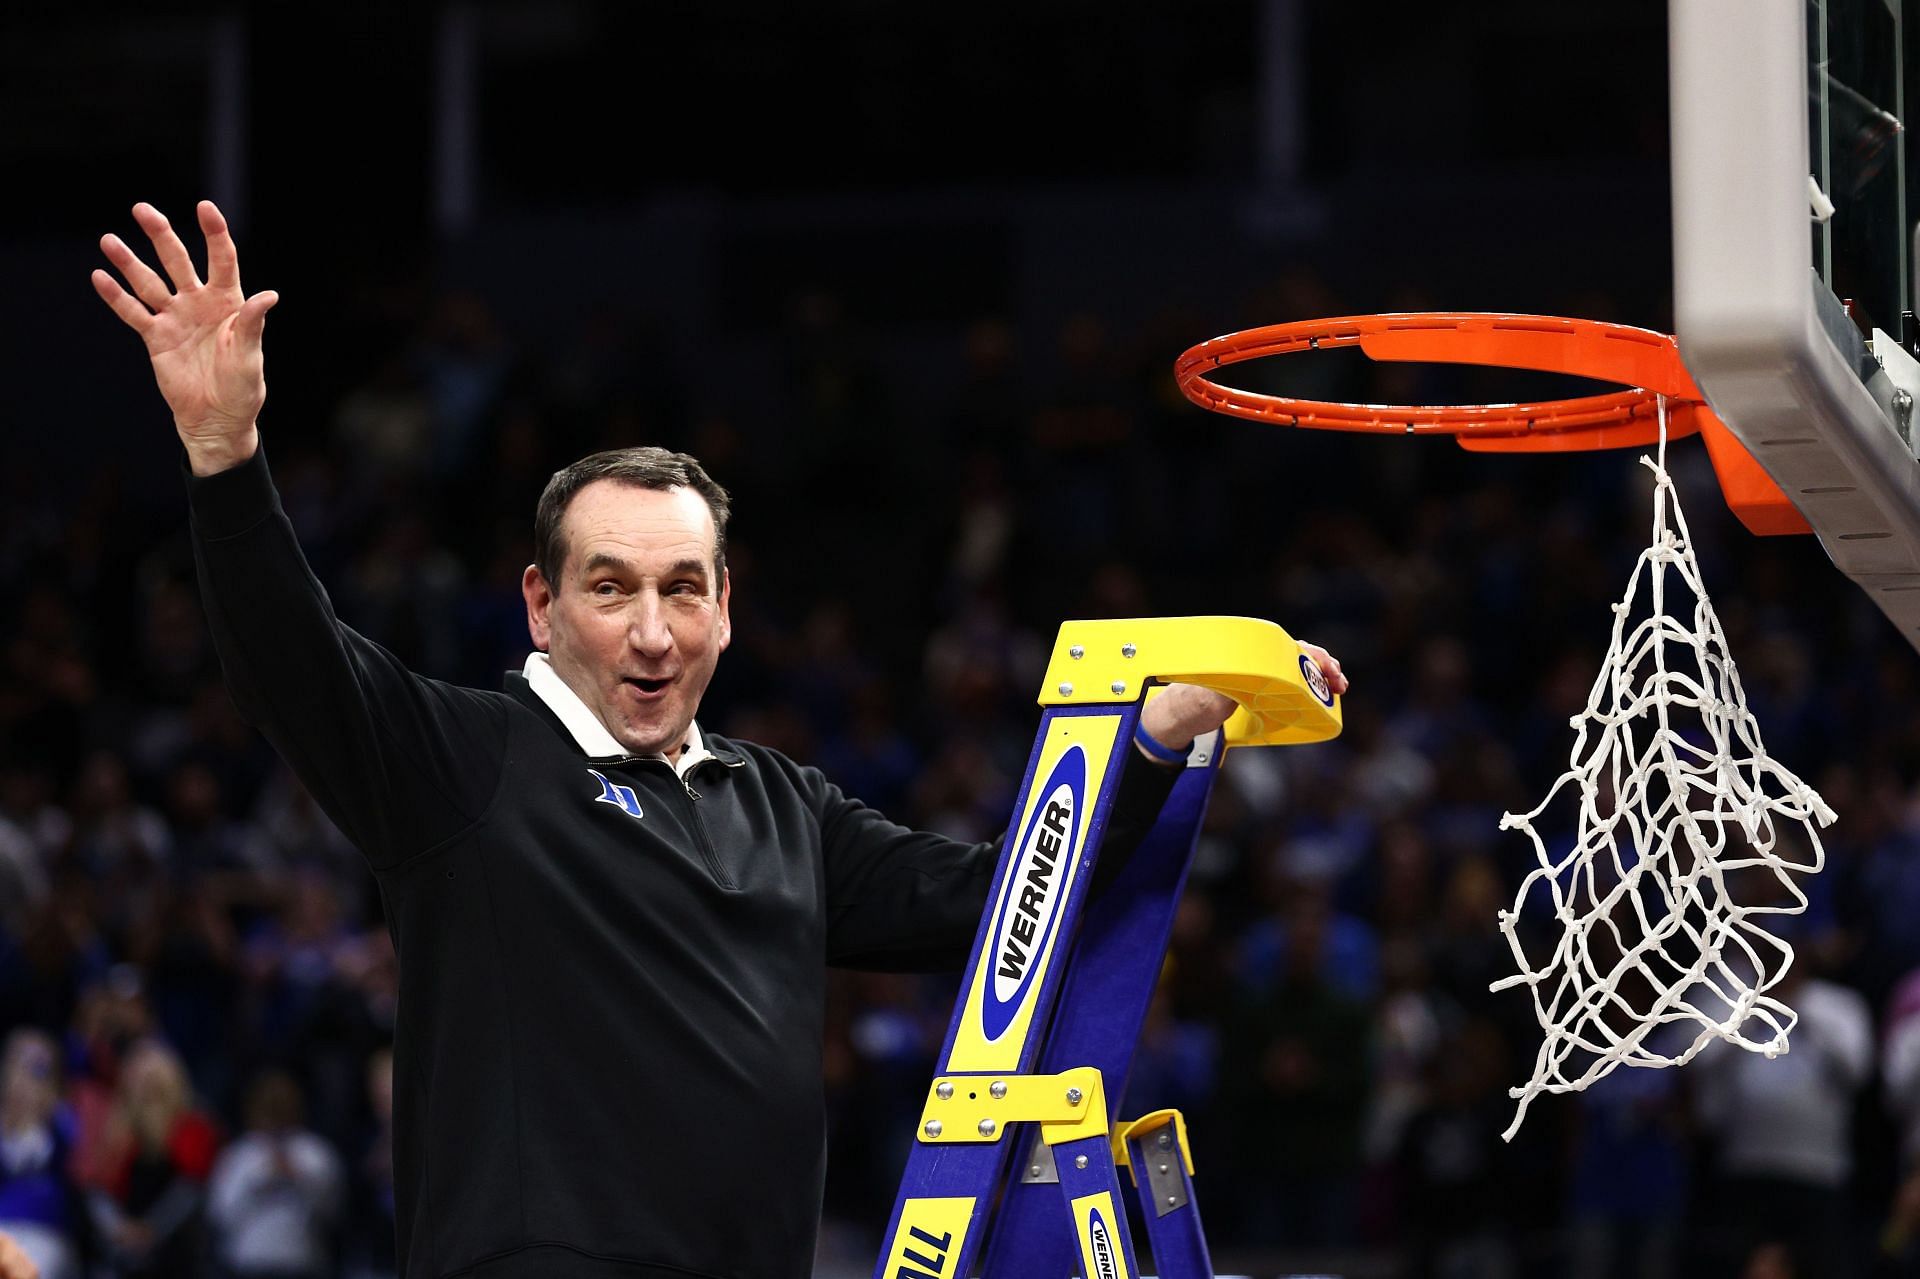 After beating the Arkansas Razorbacks, Duke cut down the West region nets, but they want more.